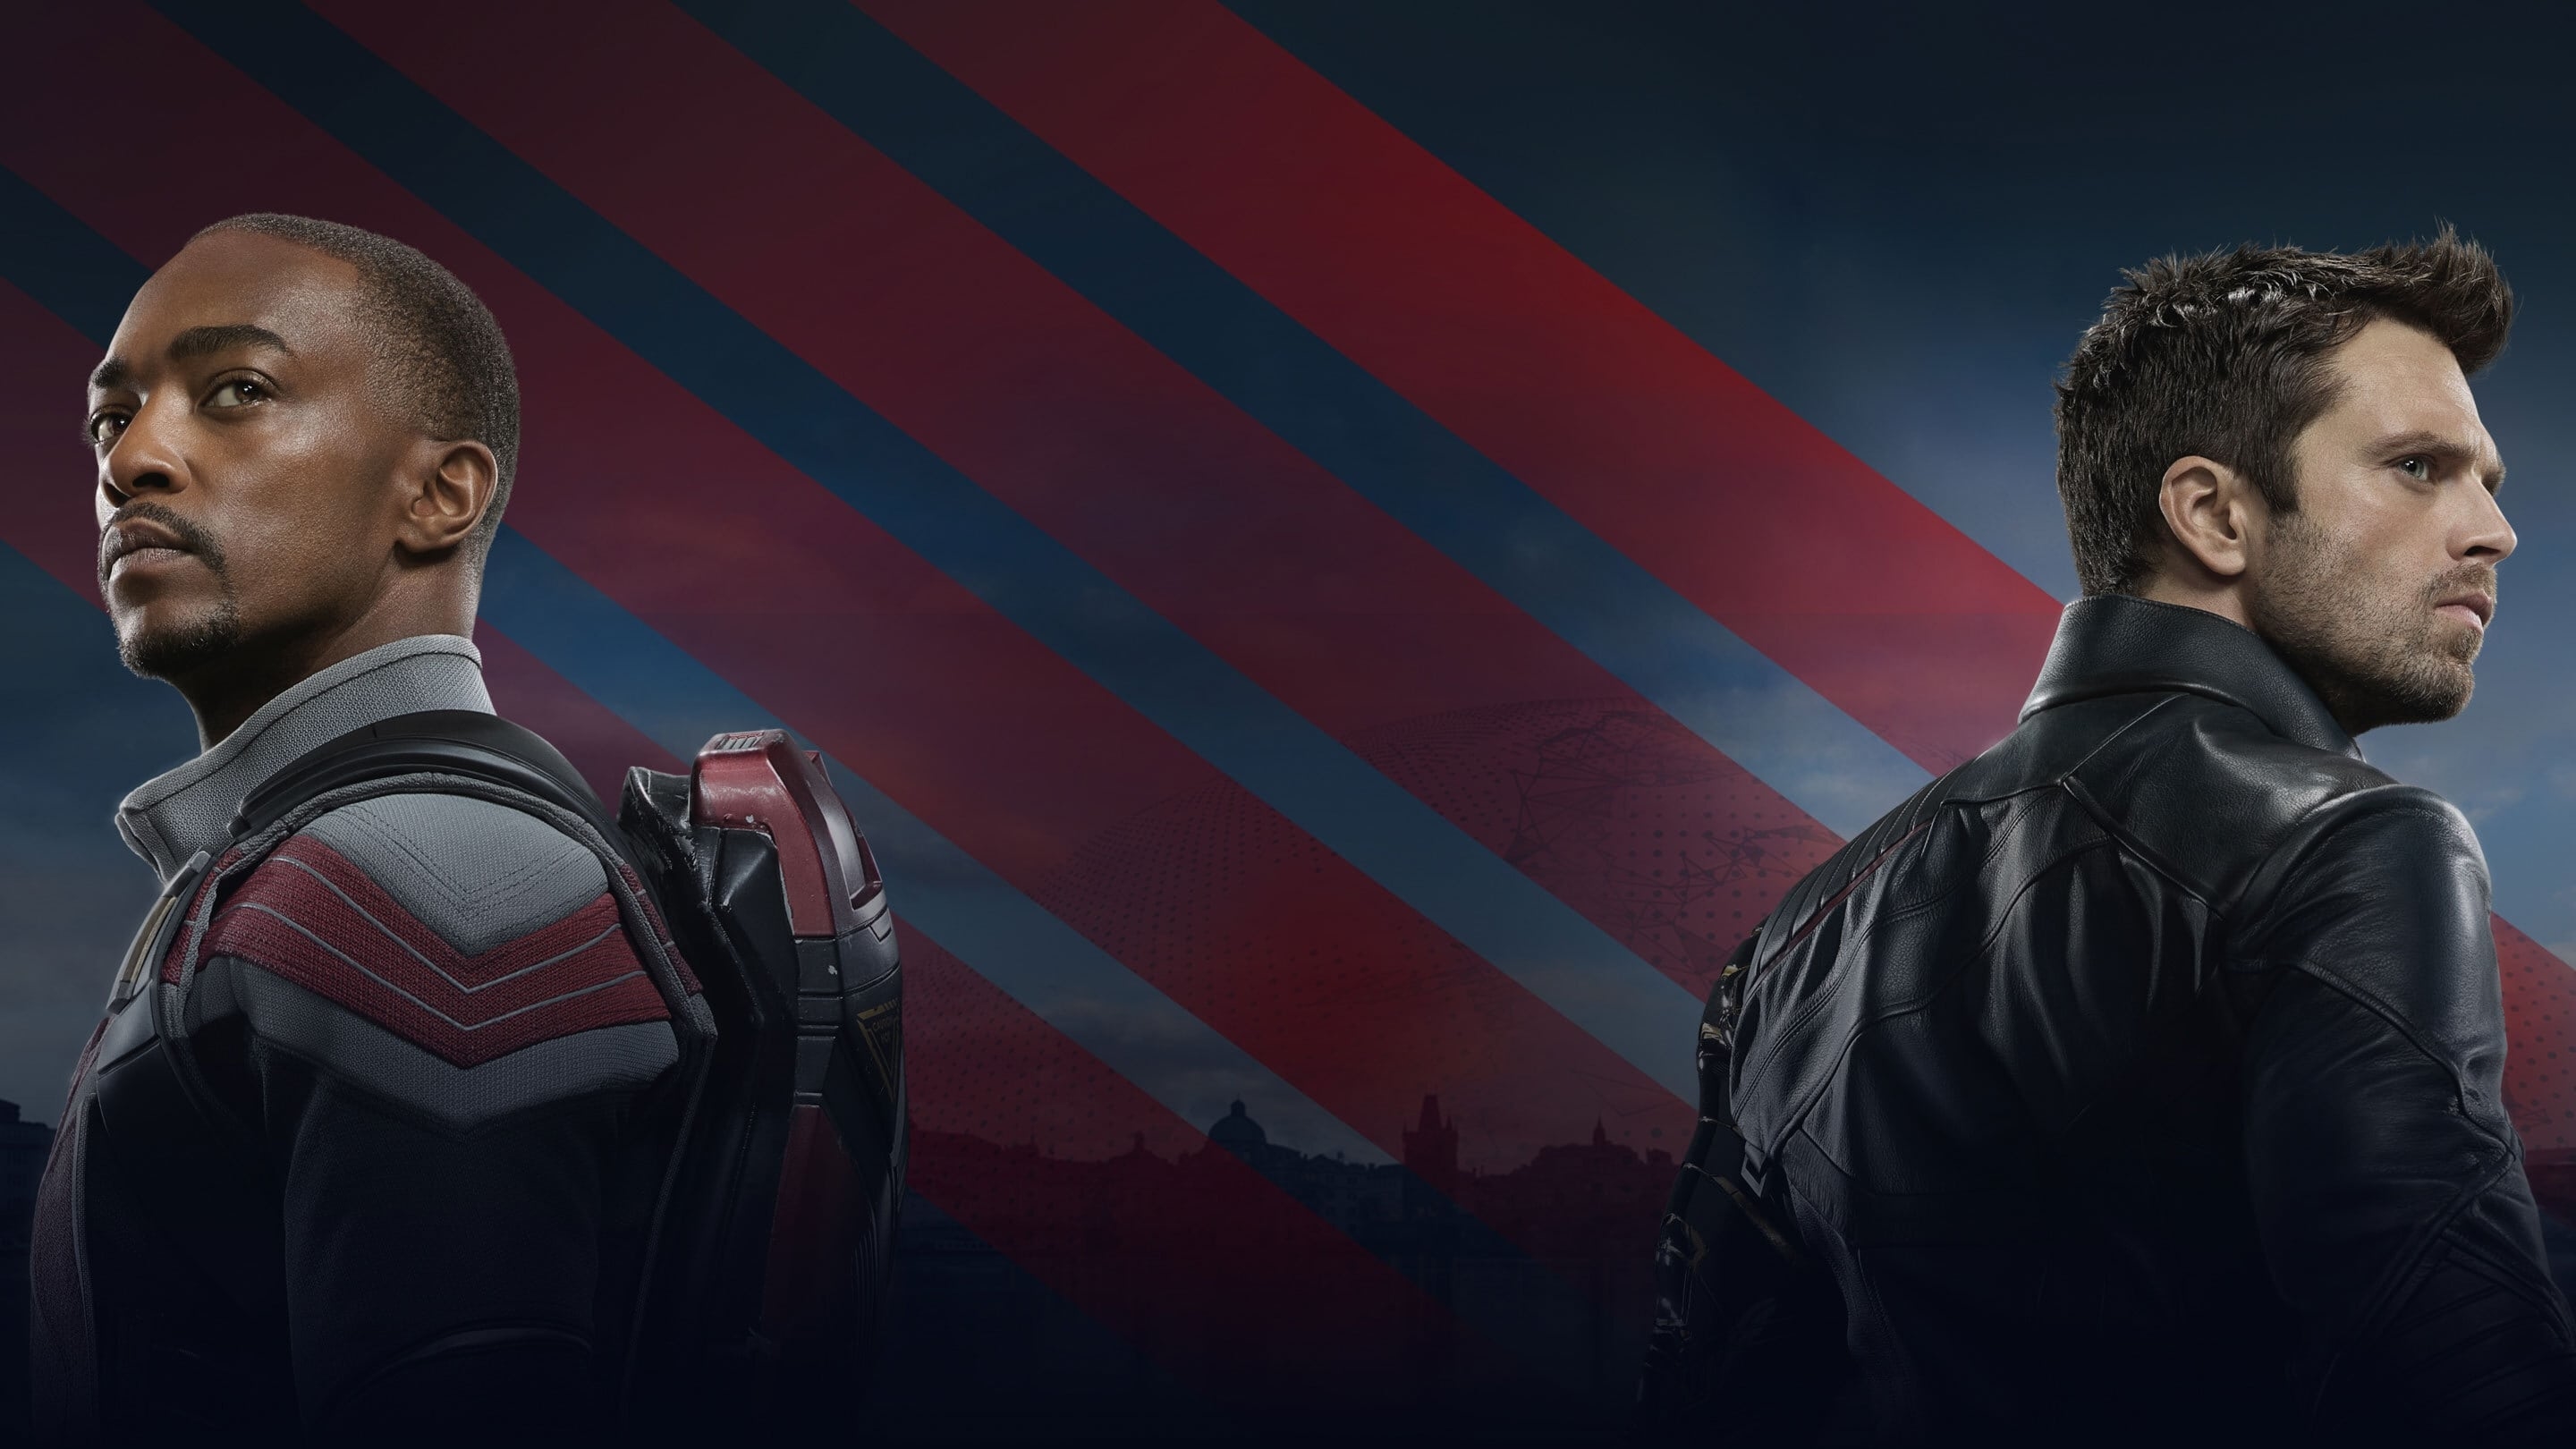 Poster of The Falcon and the Winter Soldier Wallpaper, HD TV Series 4K